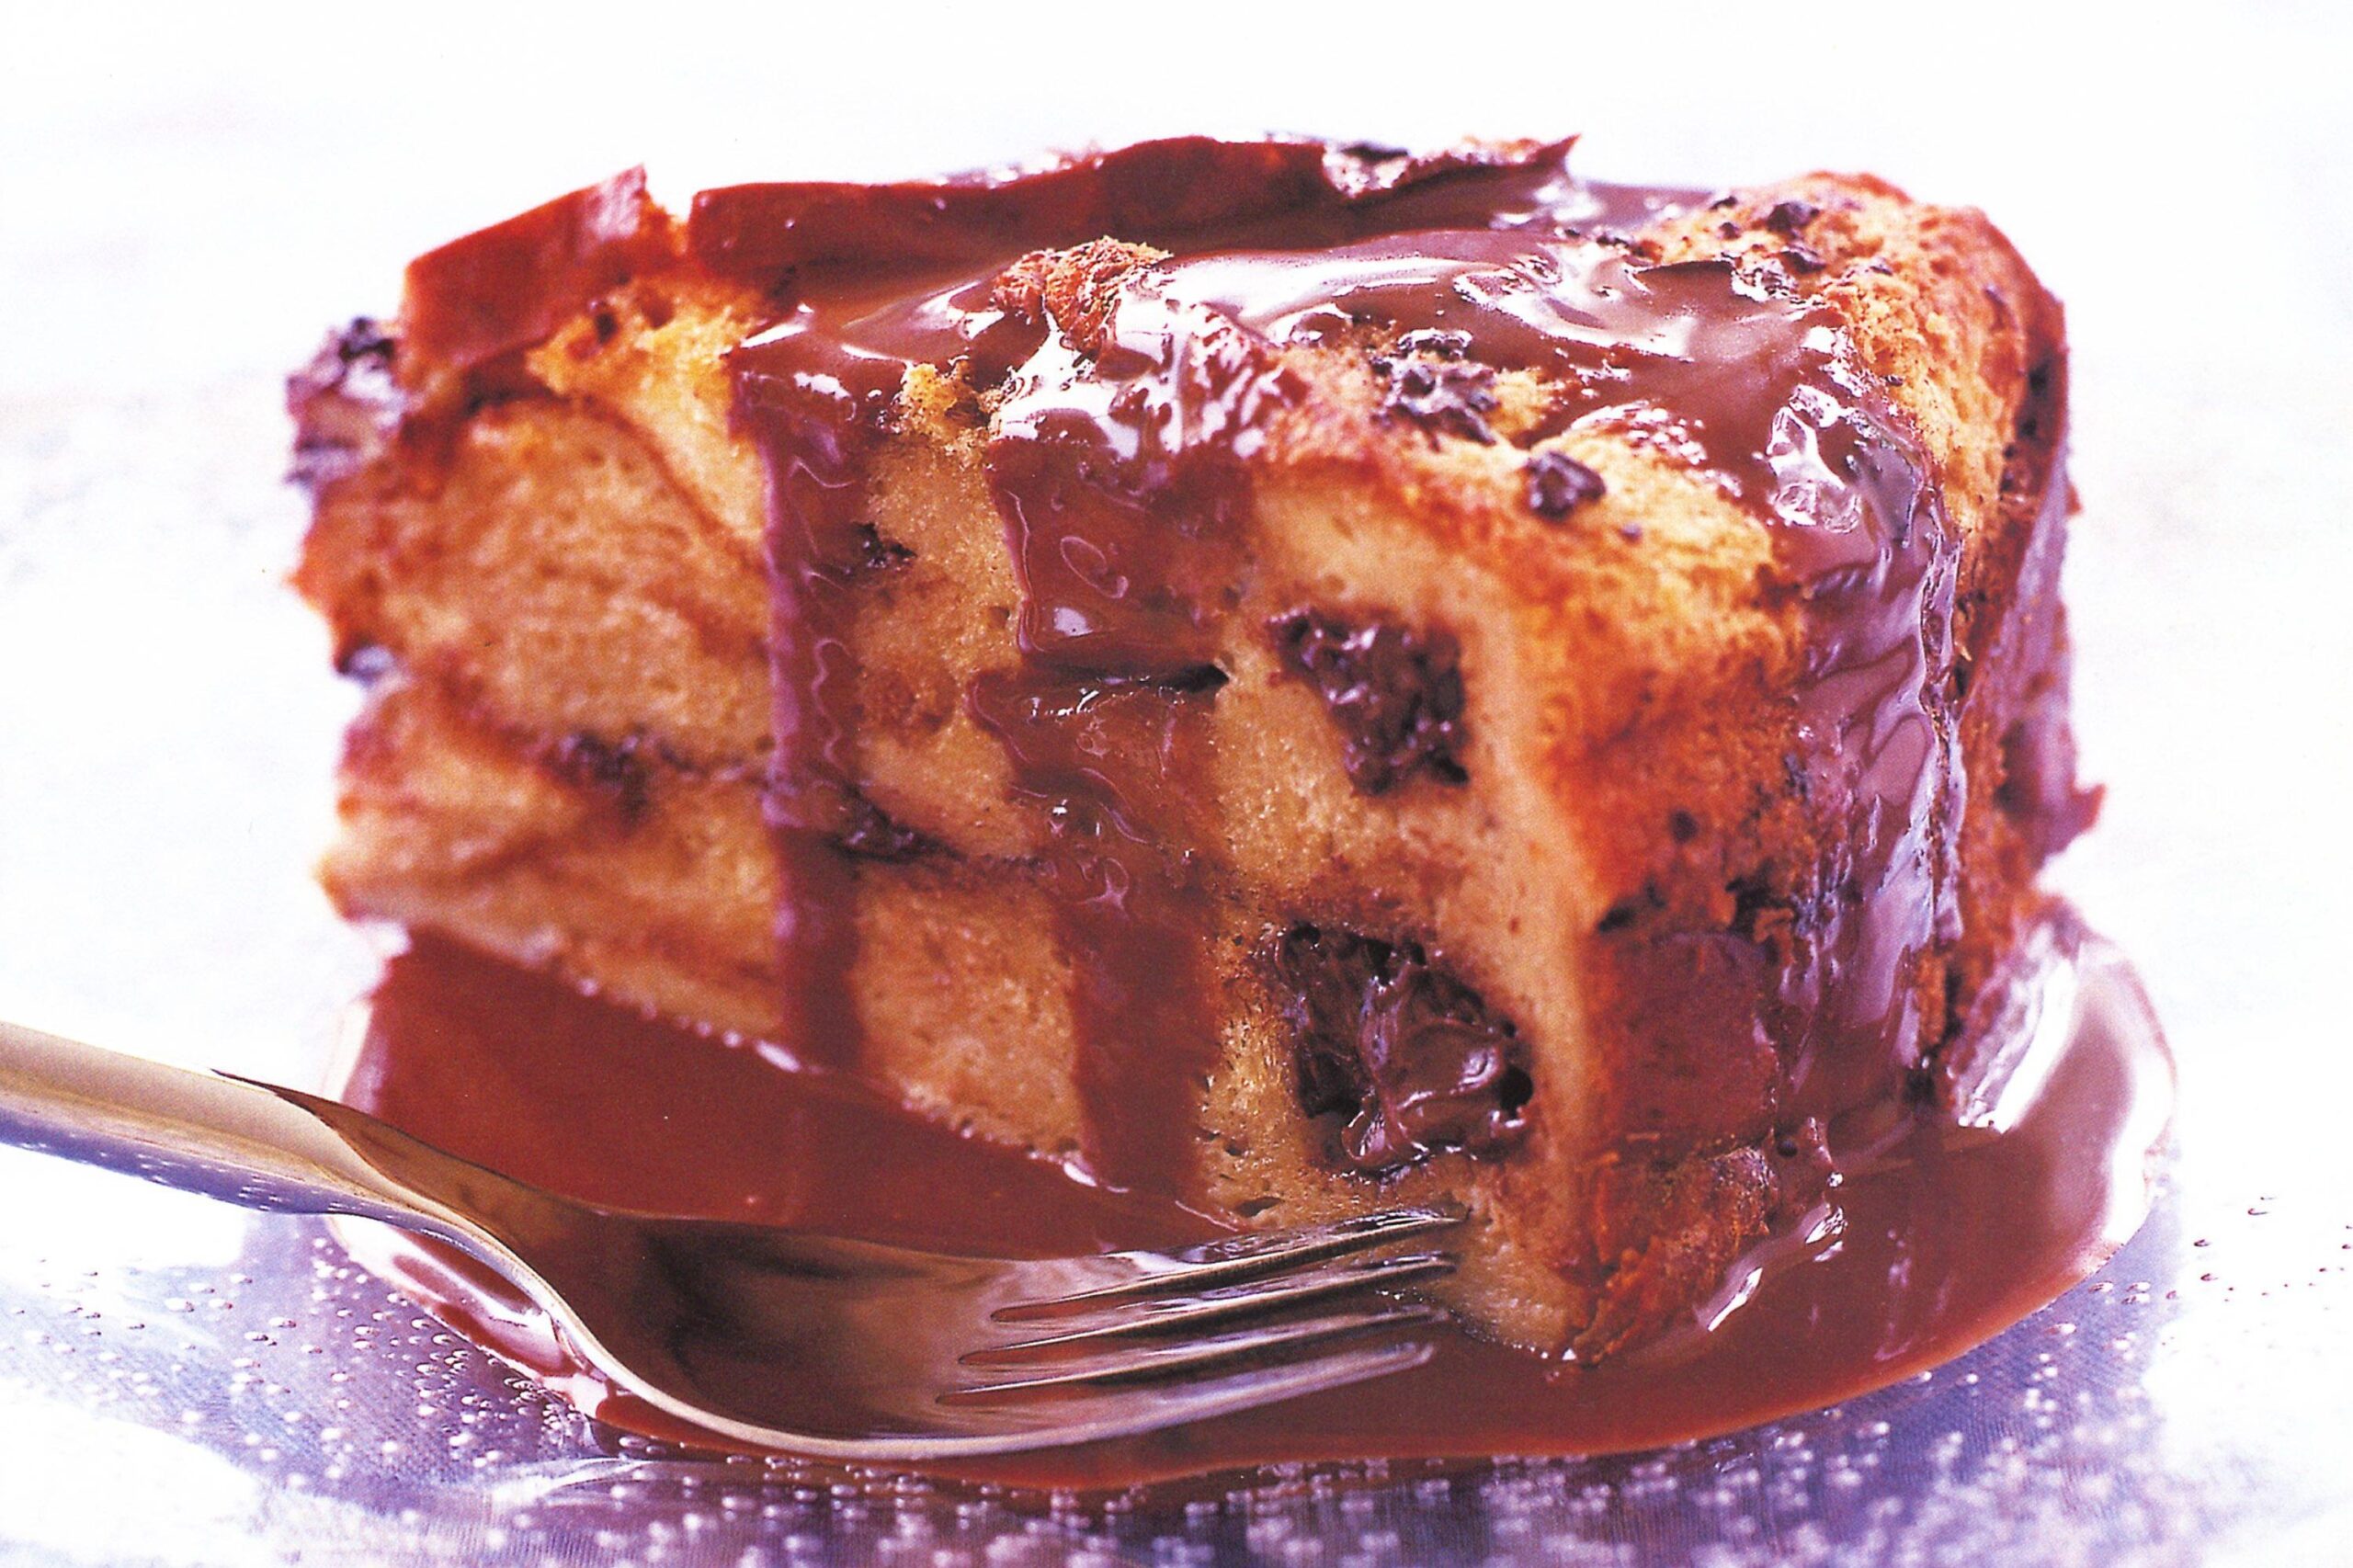  Sweet, creamy and oh-so-decadent, this cappuccino bread pudding is a coffee lover's dream come true.